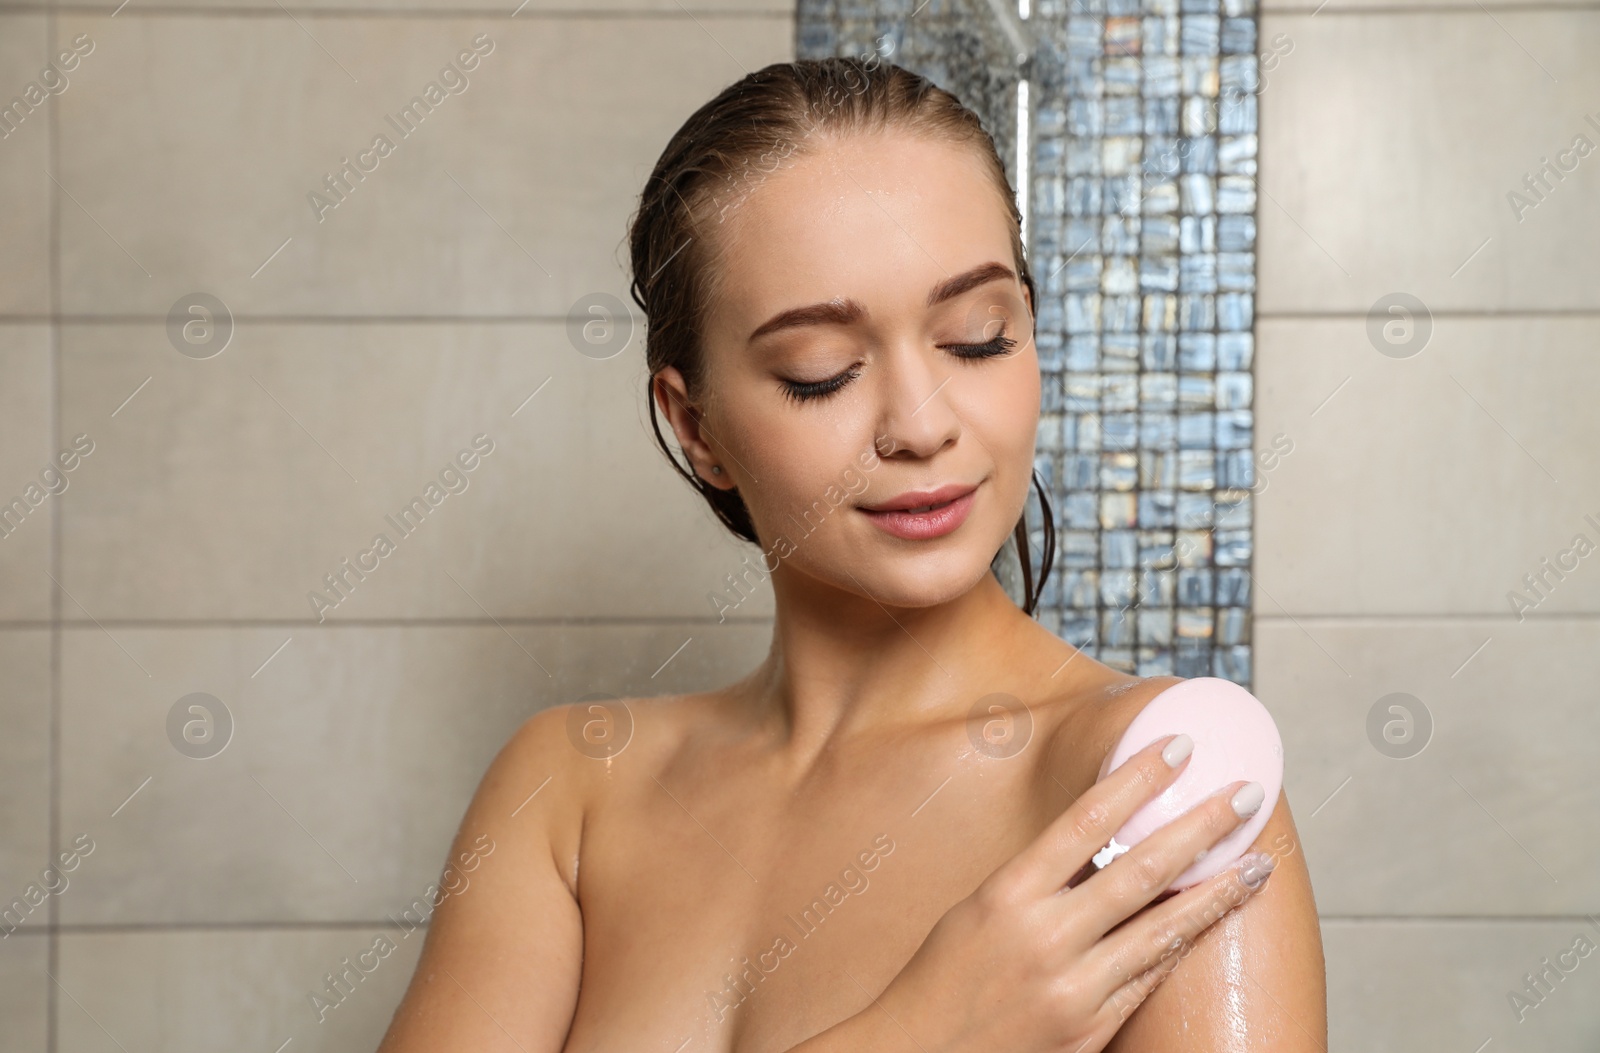 Photo of Beautiful young woman taking shower with soap in bathroom